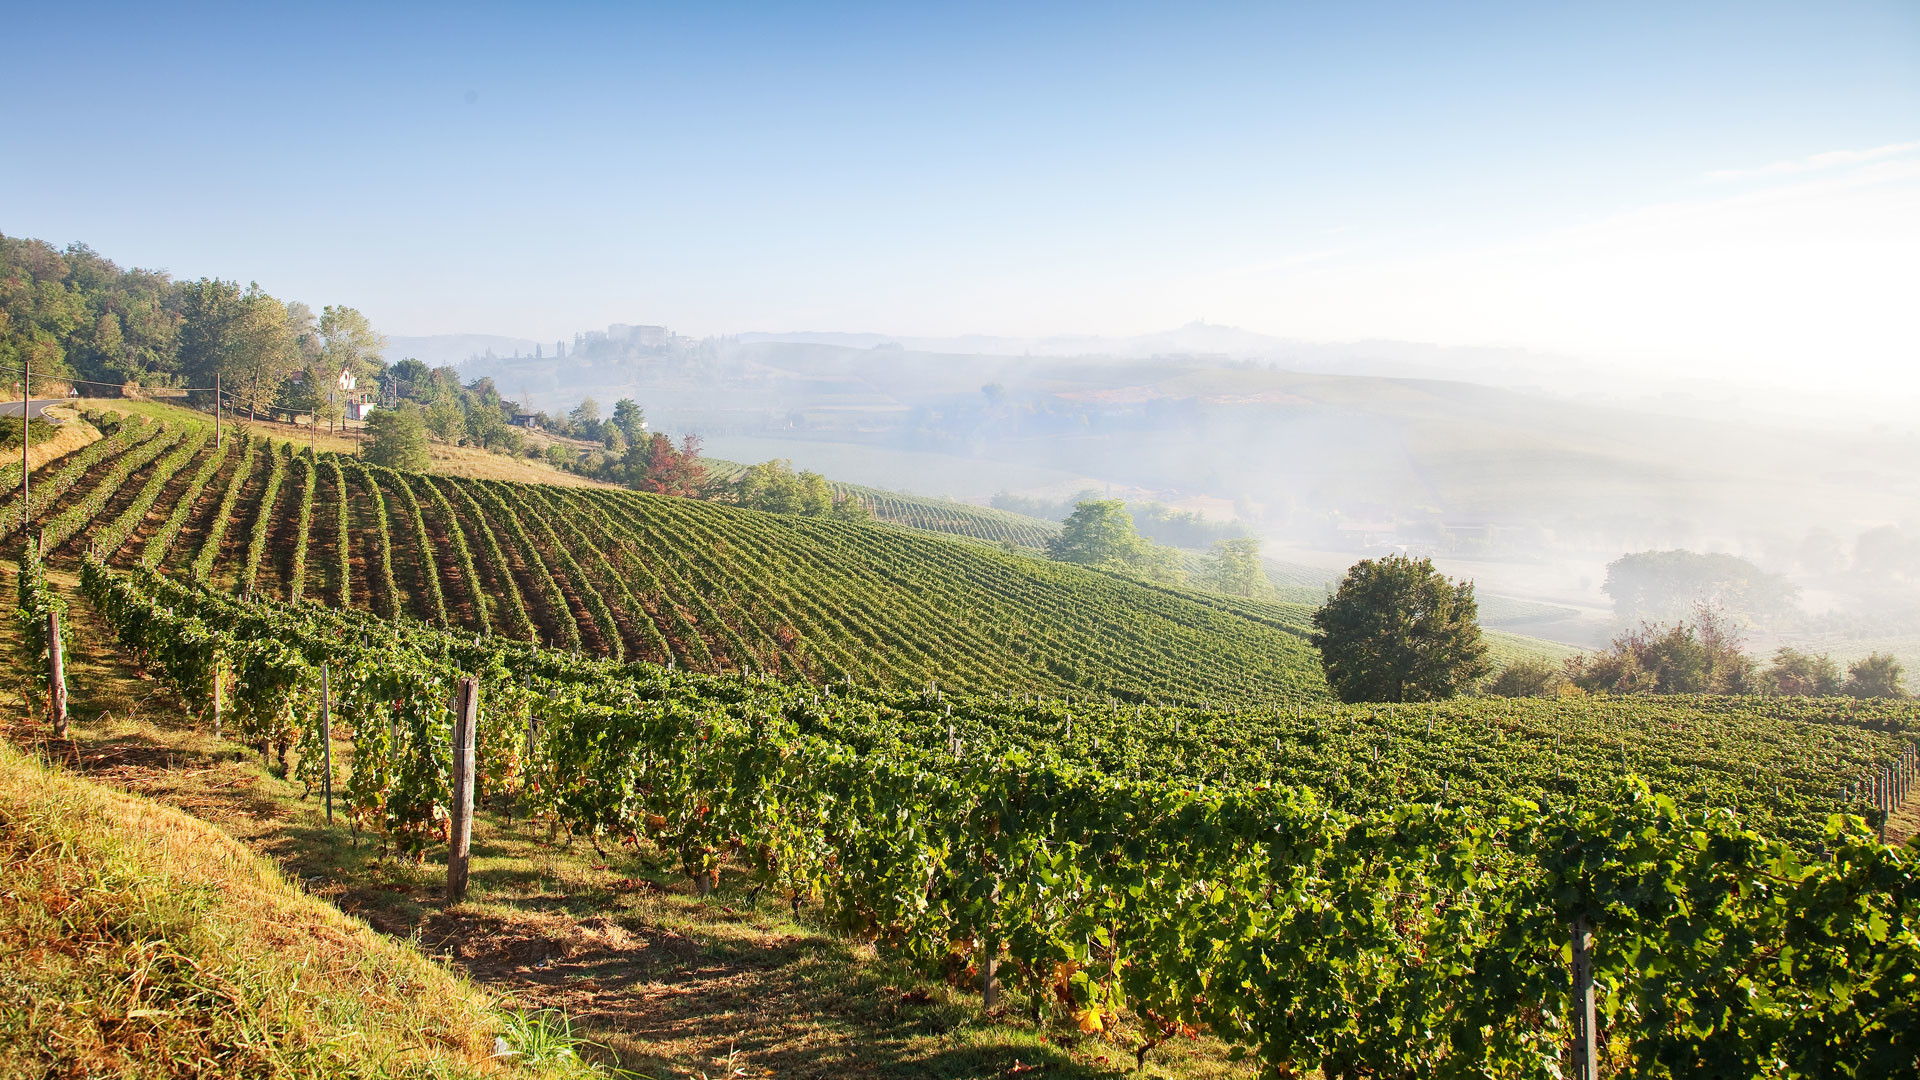 Our quality wines come from different vocated wine regions of Italy